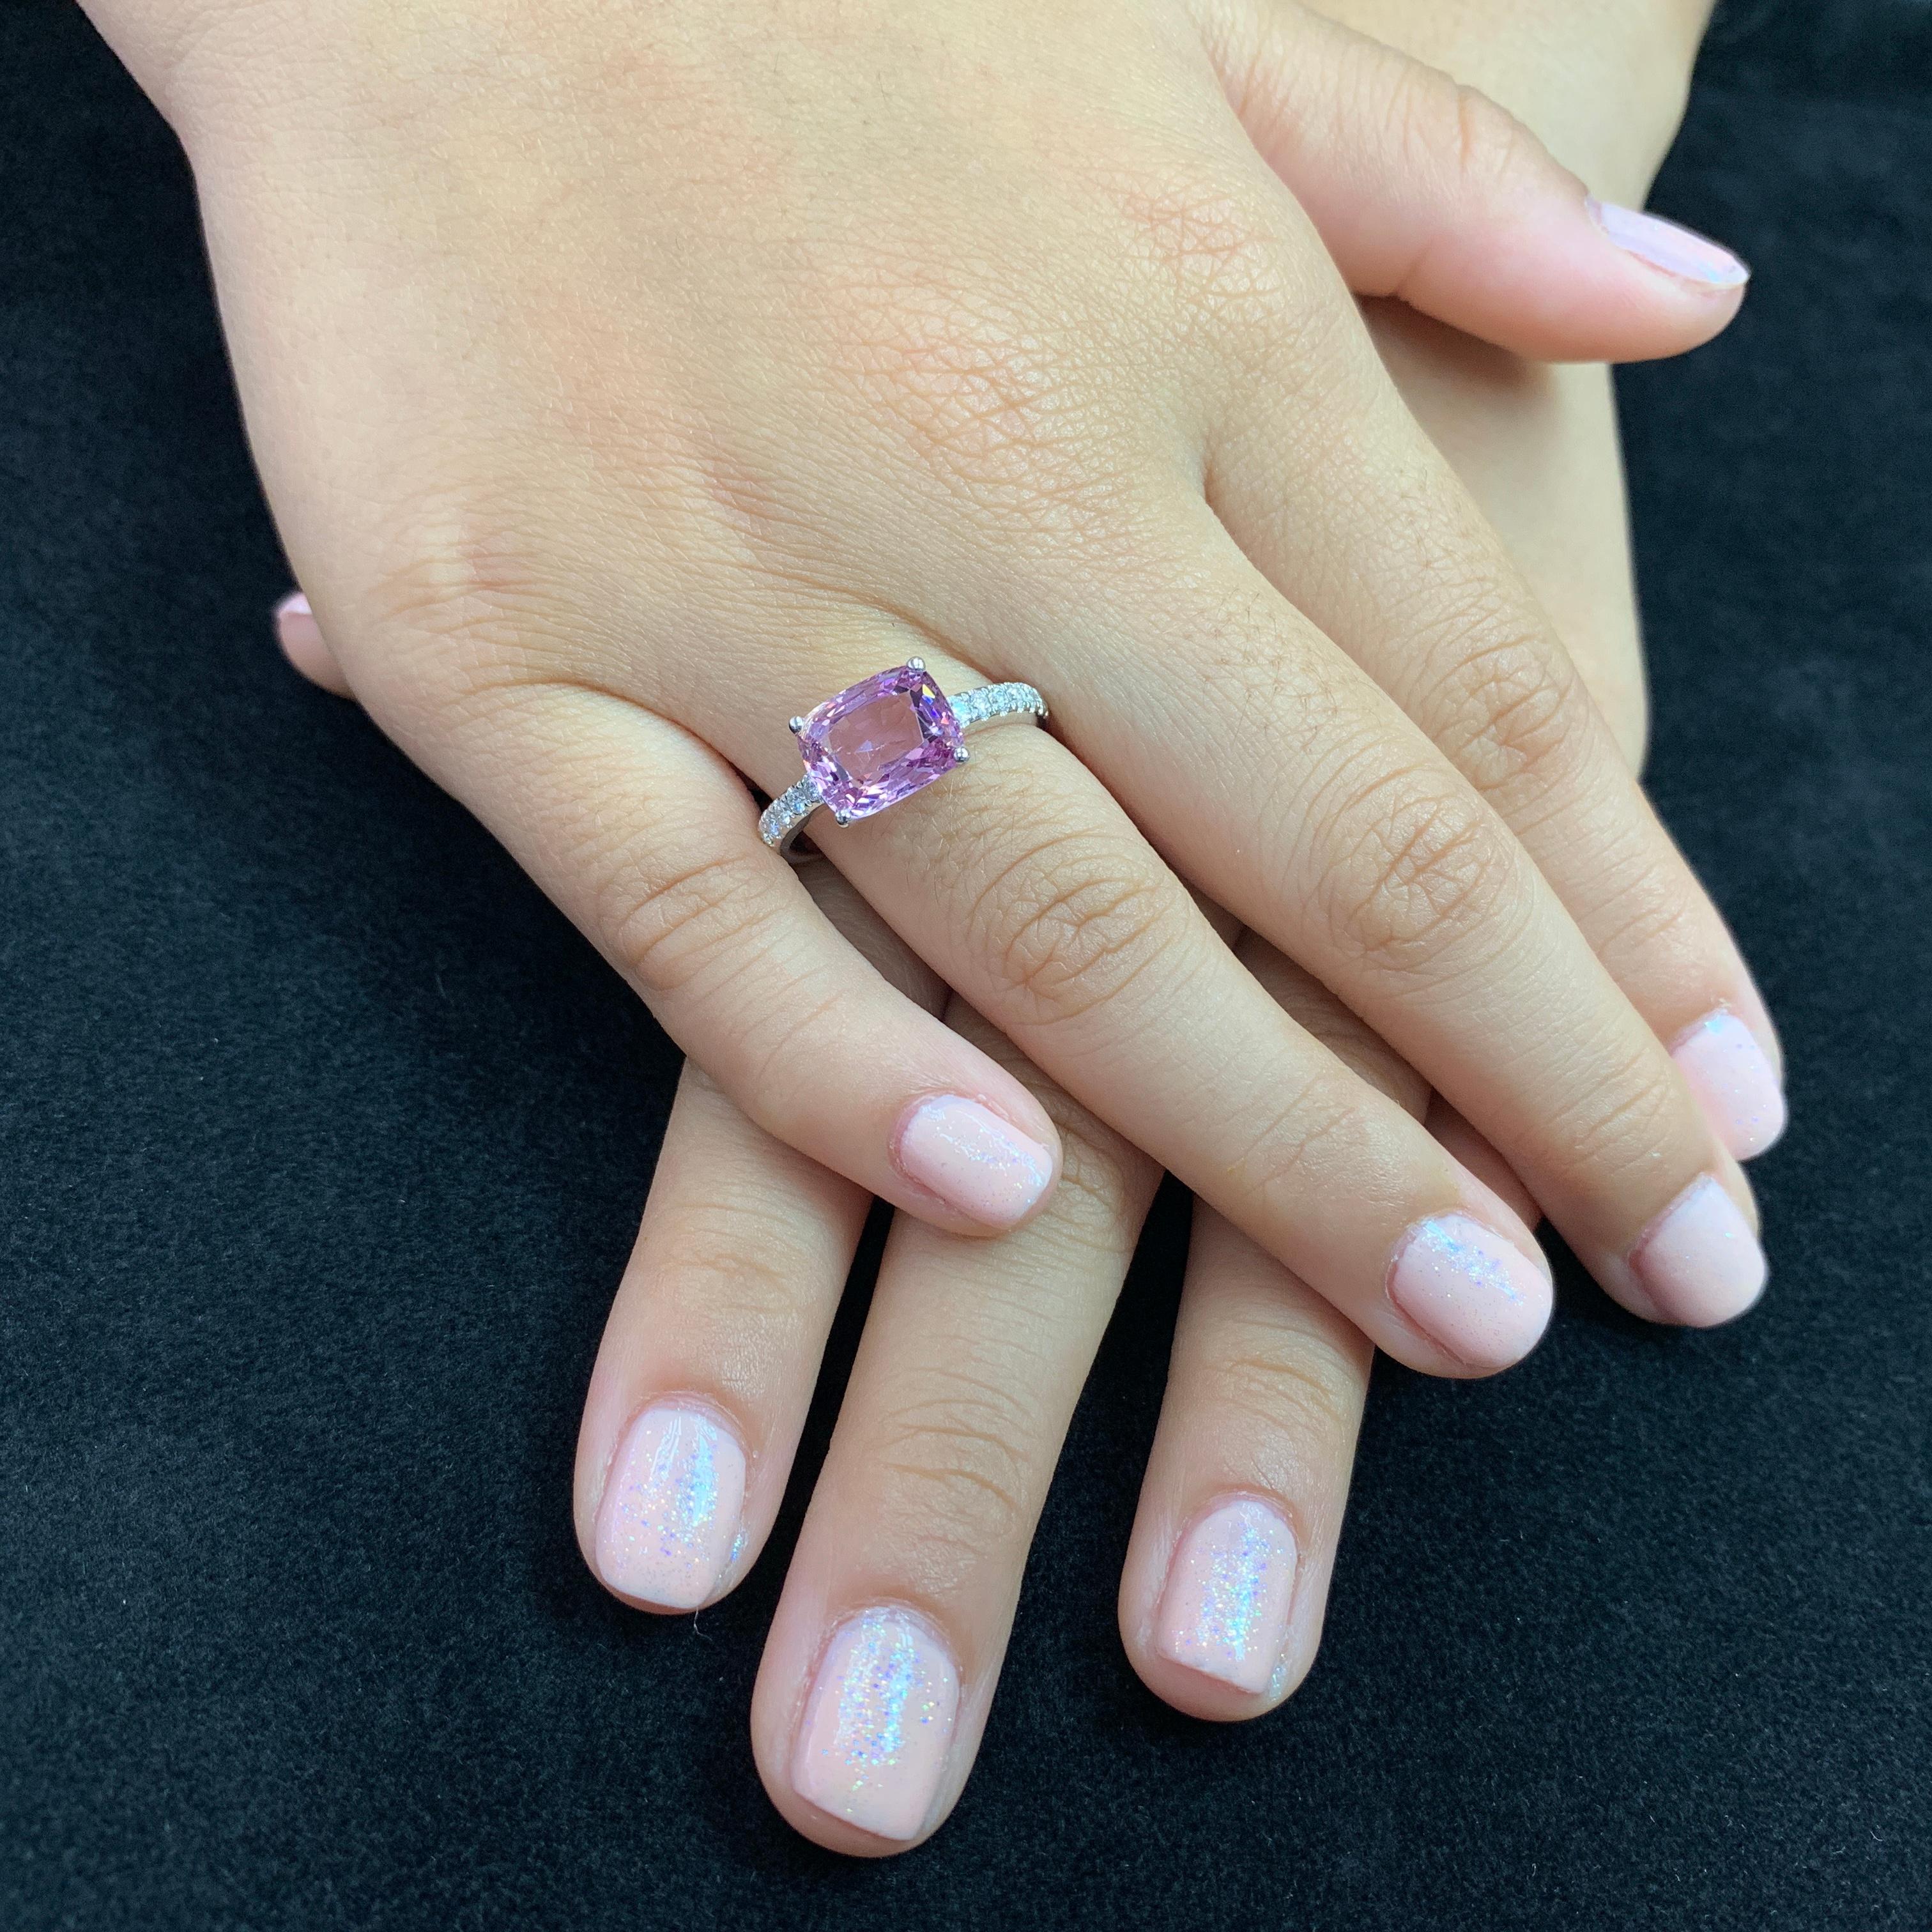 Here is a wonderful Spinel ring. The ring is set in 18k white gold and diamonds. There are 0.20Cts of small round diamonds on each sides of the center Spinel. The Natural Spinel is almost loupe clean. The color is crispy. The ring is full of life.